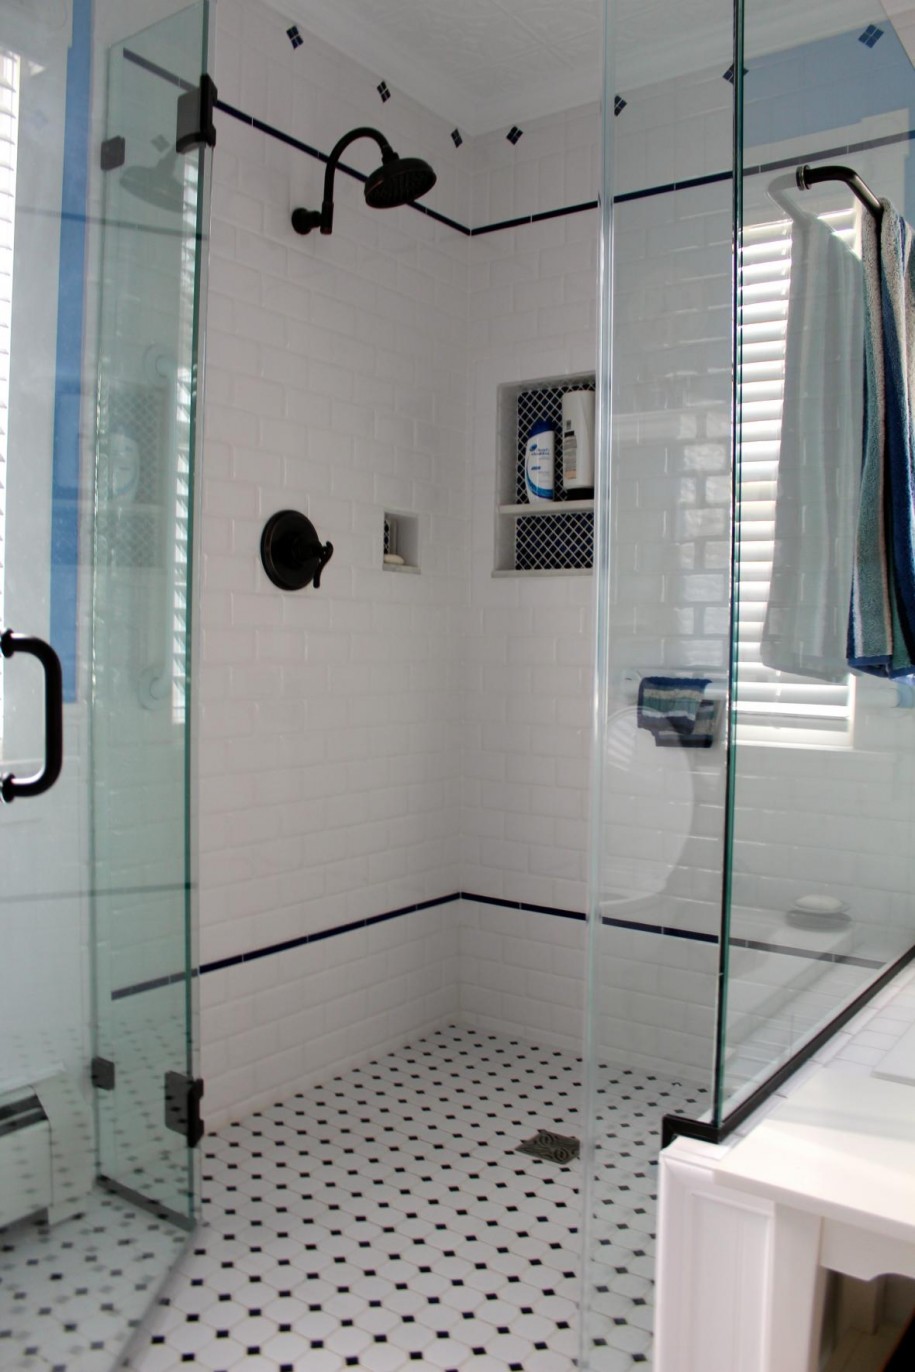 Stunning-Shower-Cubicle-Area-Design-With-Glasses-Door-And-Stunning-Vintage-Bathroom-Tile-Patterns-Ideas